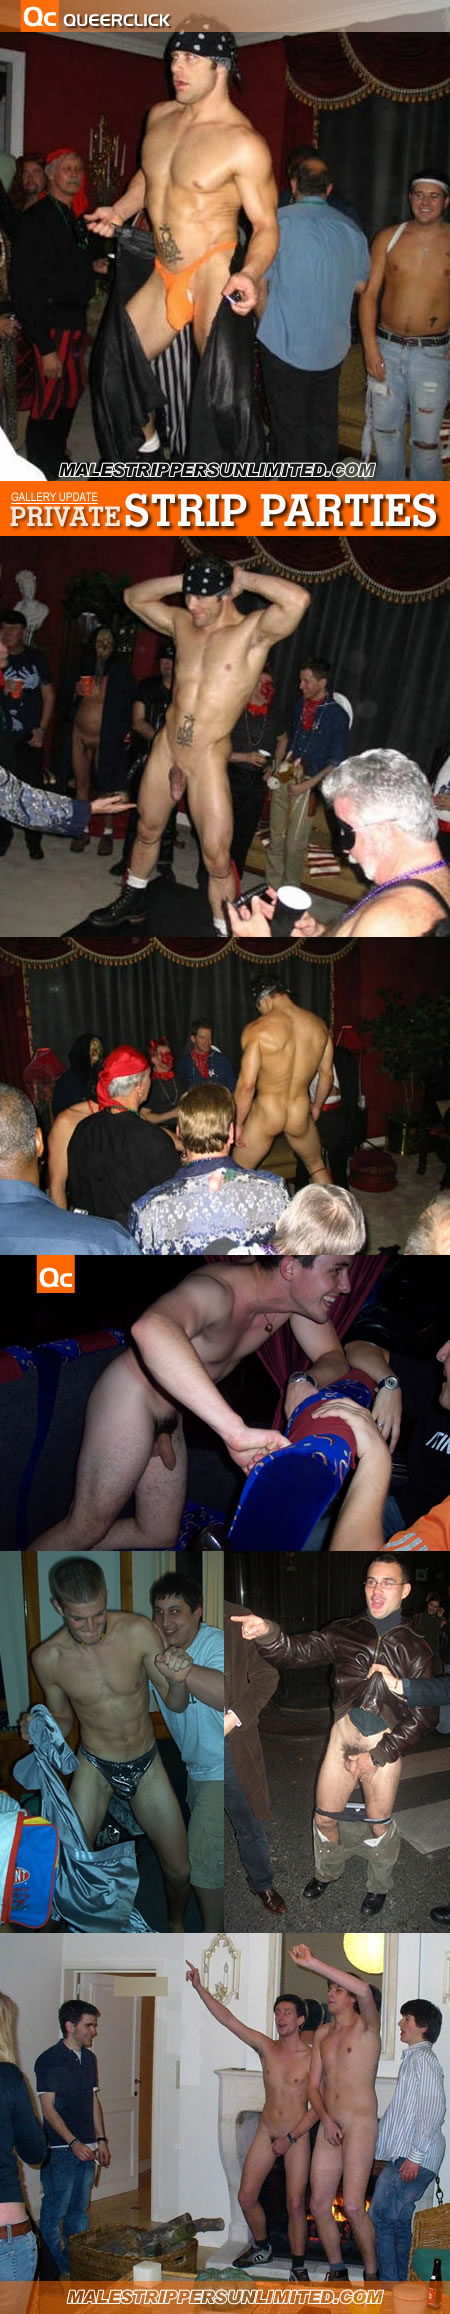 Private Strip Parties @ Male Strippers Unlimited.Com